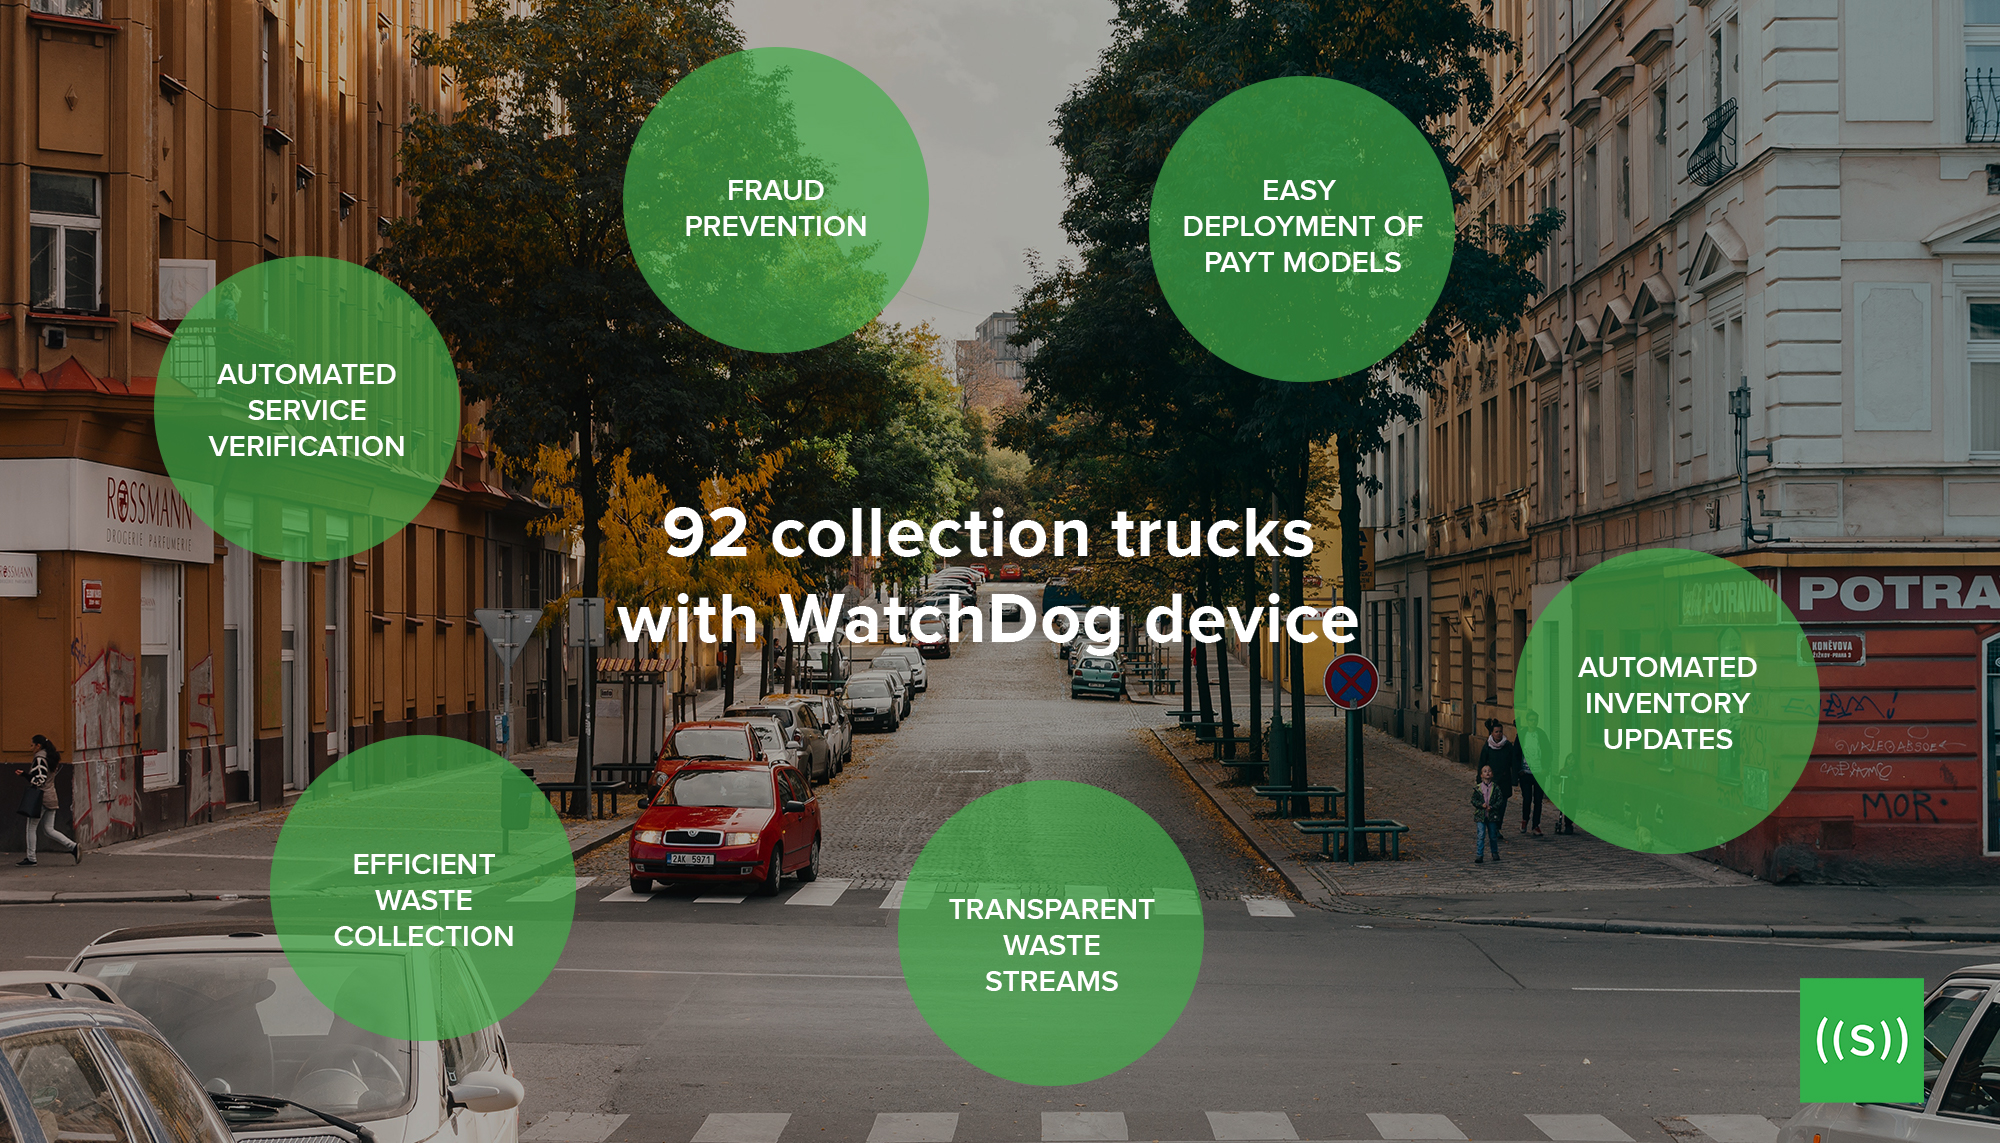 92 collection trucks with WatchDog devices in Bratislava. 